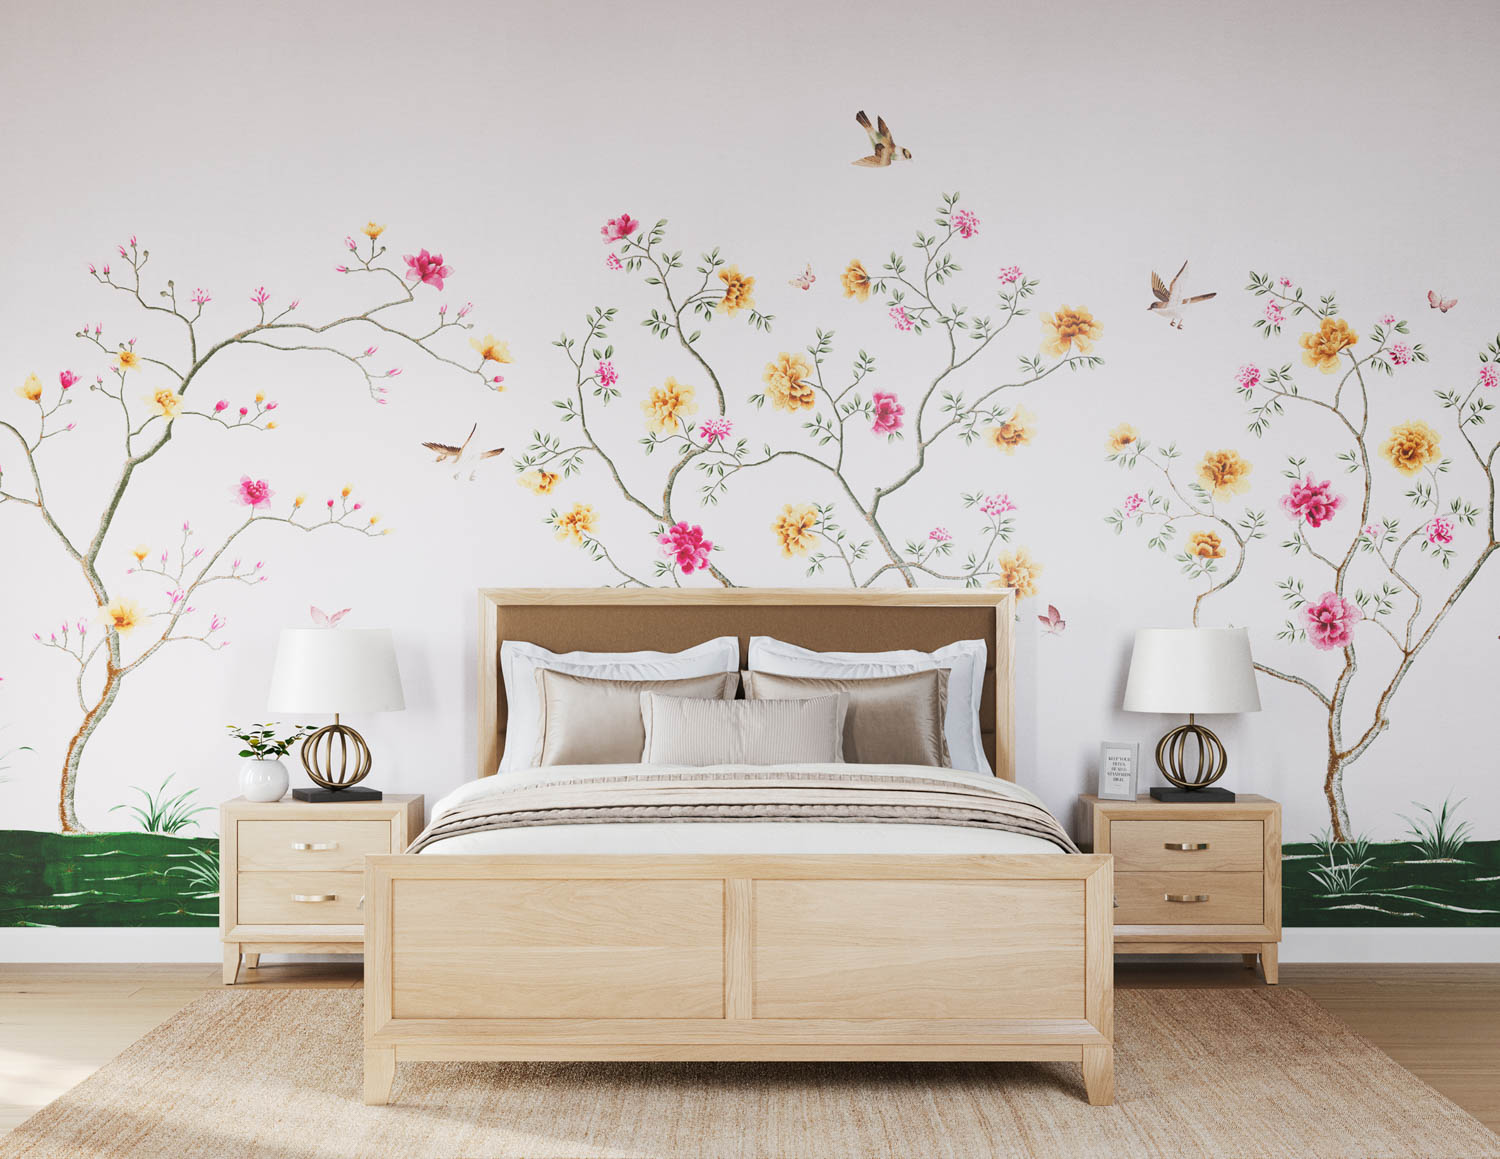 wall mural of flowers behind a bed